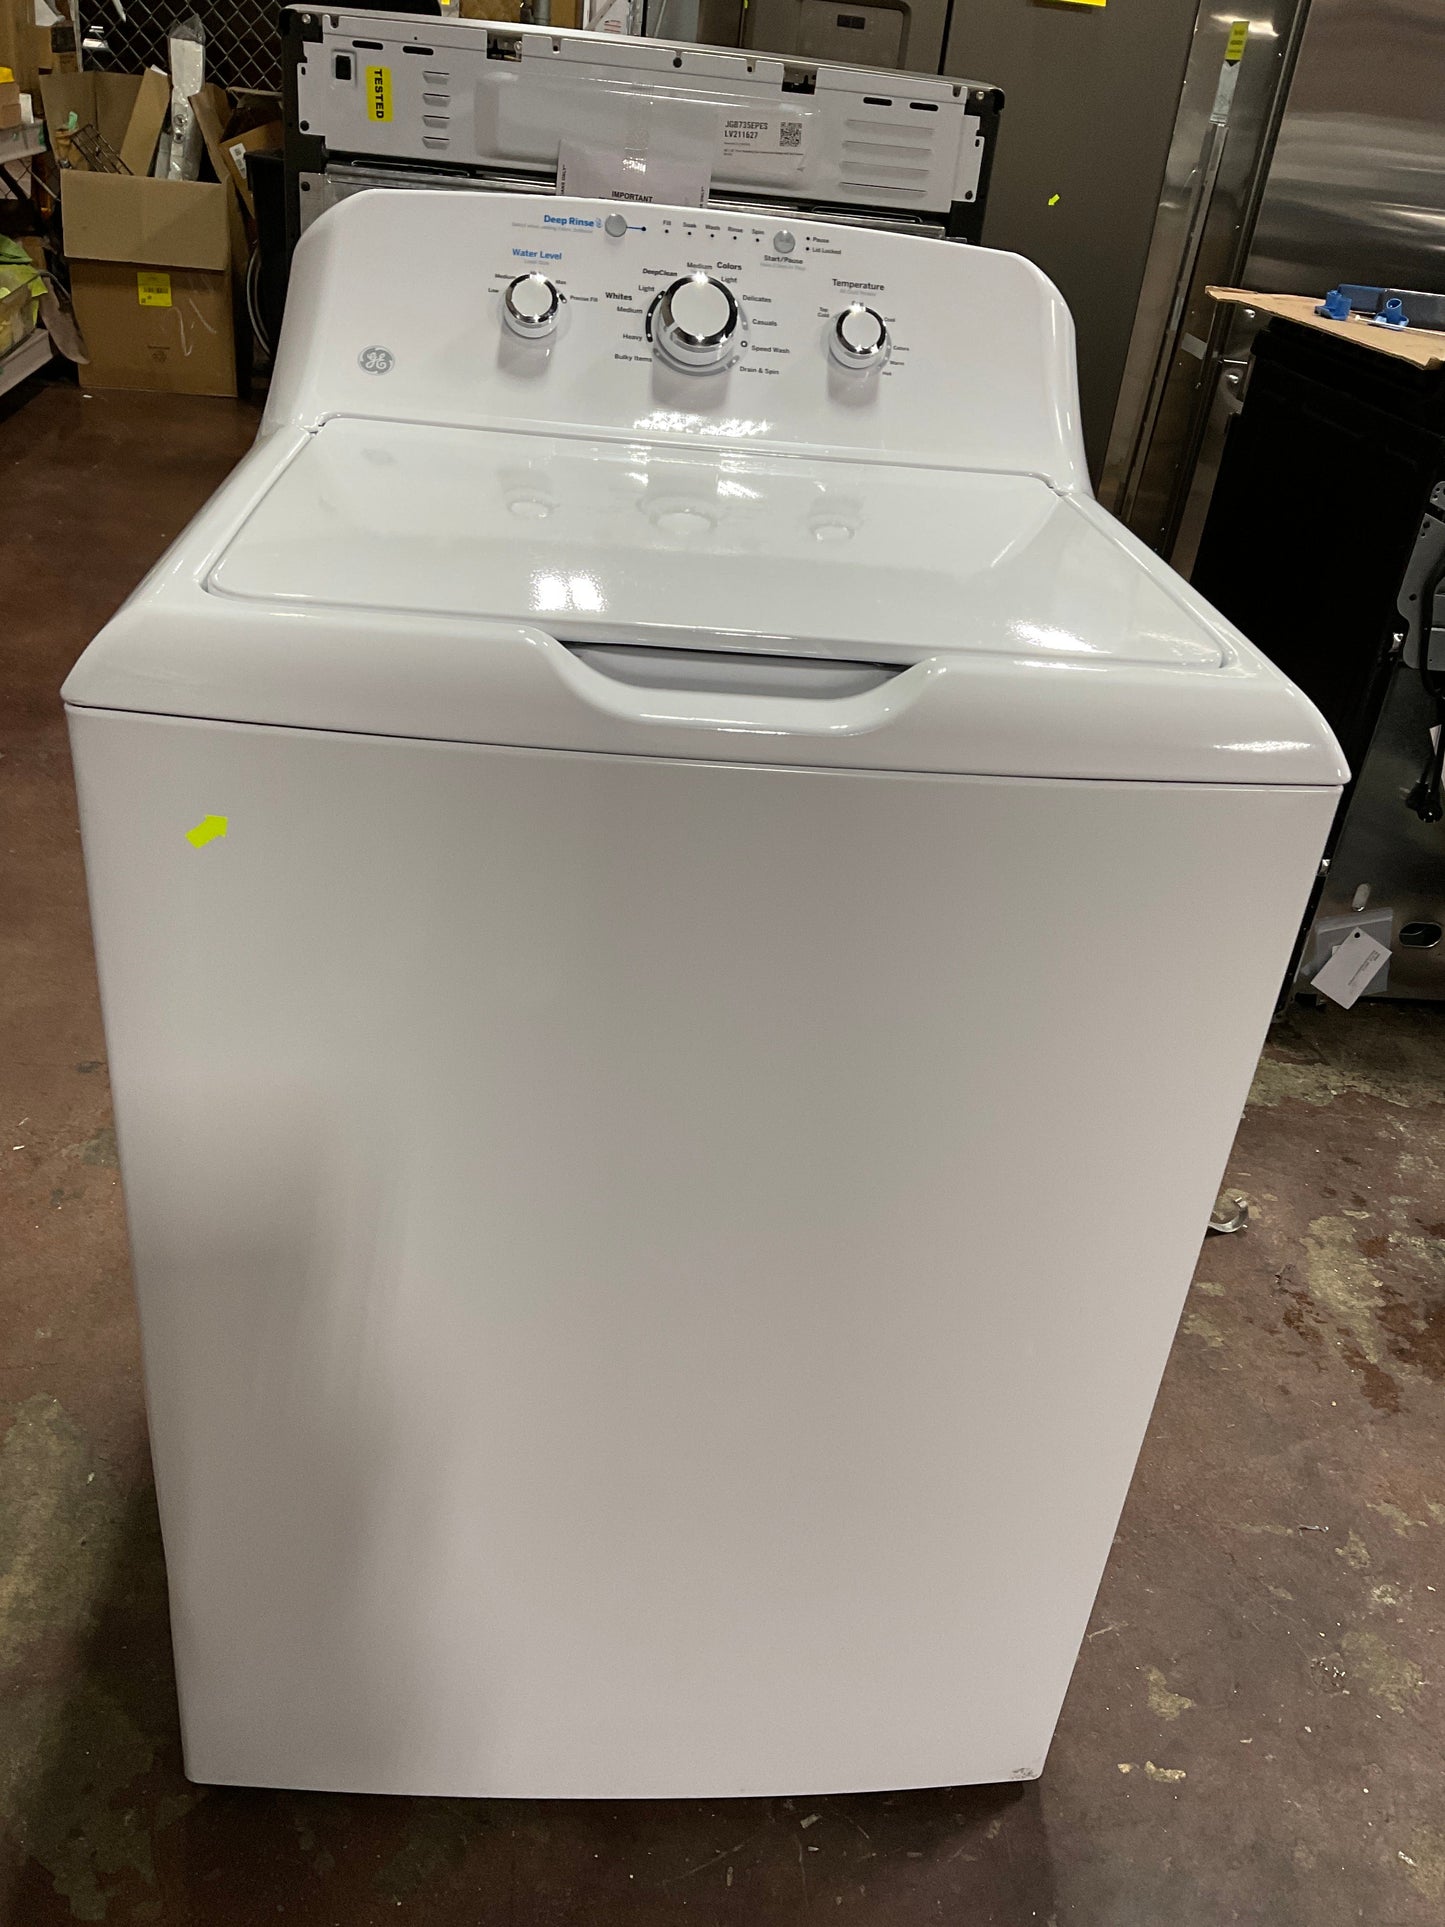 GE® 4.2 cu. ft. Capacity Washer with Stainless Steel Basket